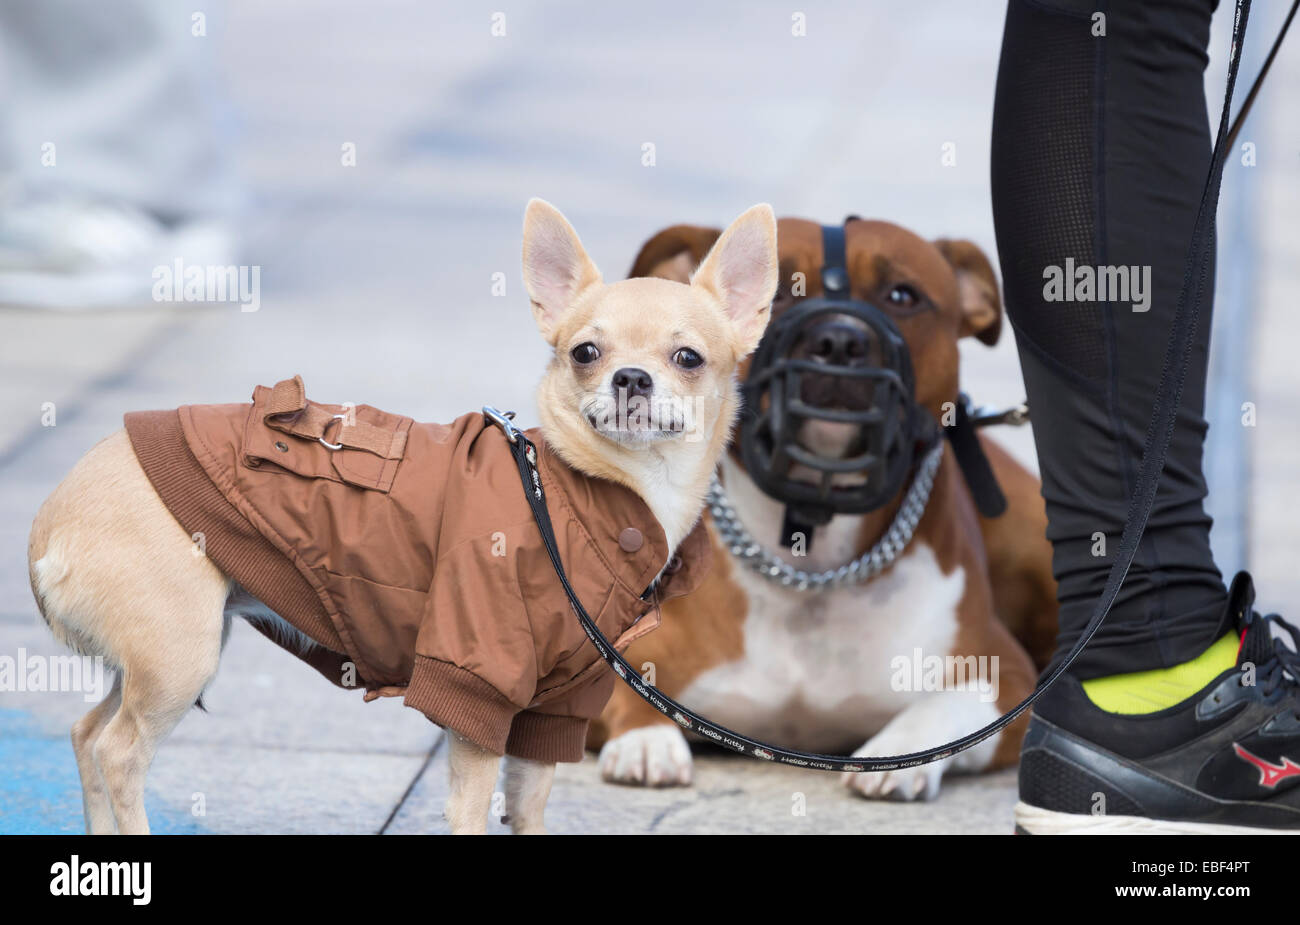 . Chihuahua wearing jacket with muzzled Bull Terrier in background Stock Photo